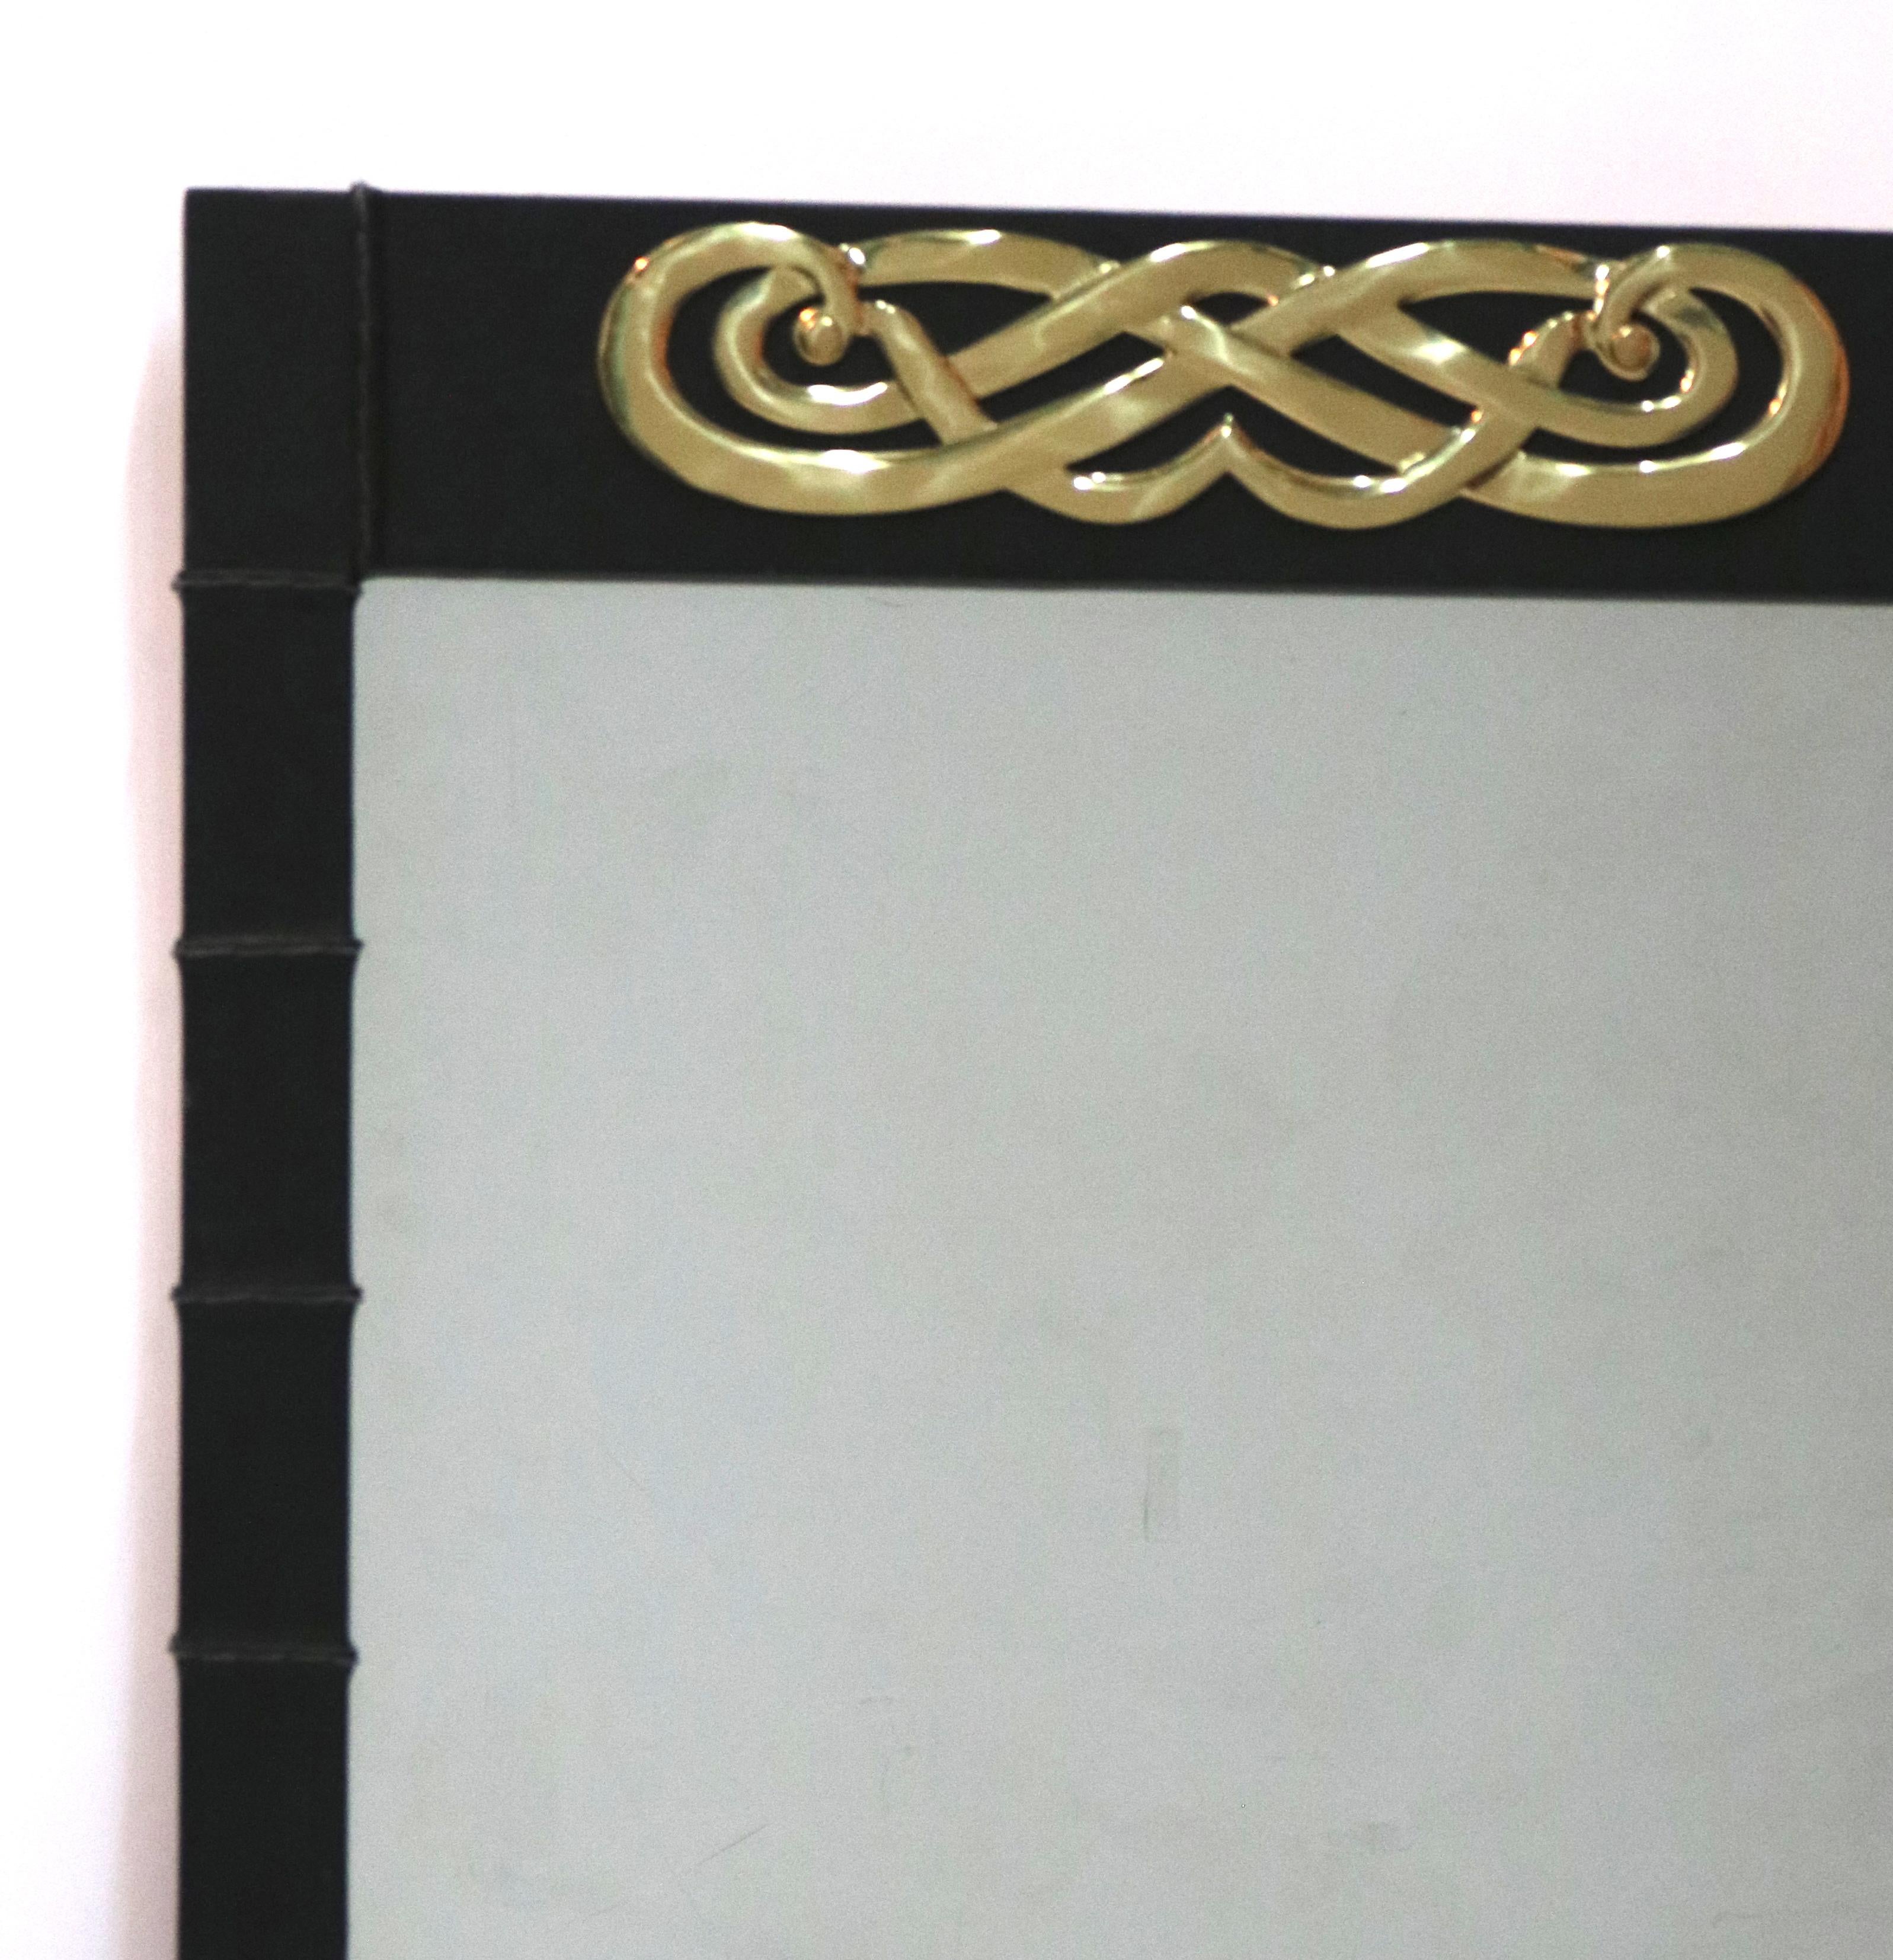 Mid-Century Modern gorgeous rib stitched design leather wrapped wood mirror with a polished brass medallion centered on the top area.

Measures: 24 1/2' W x 36